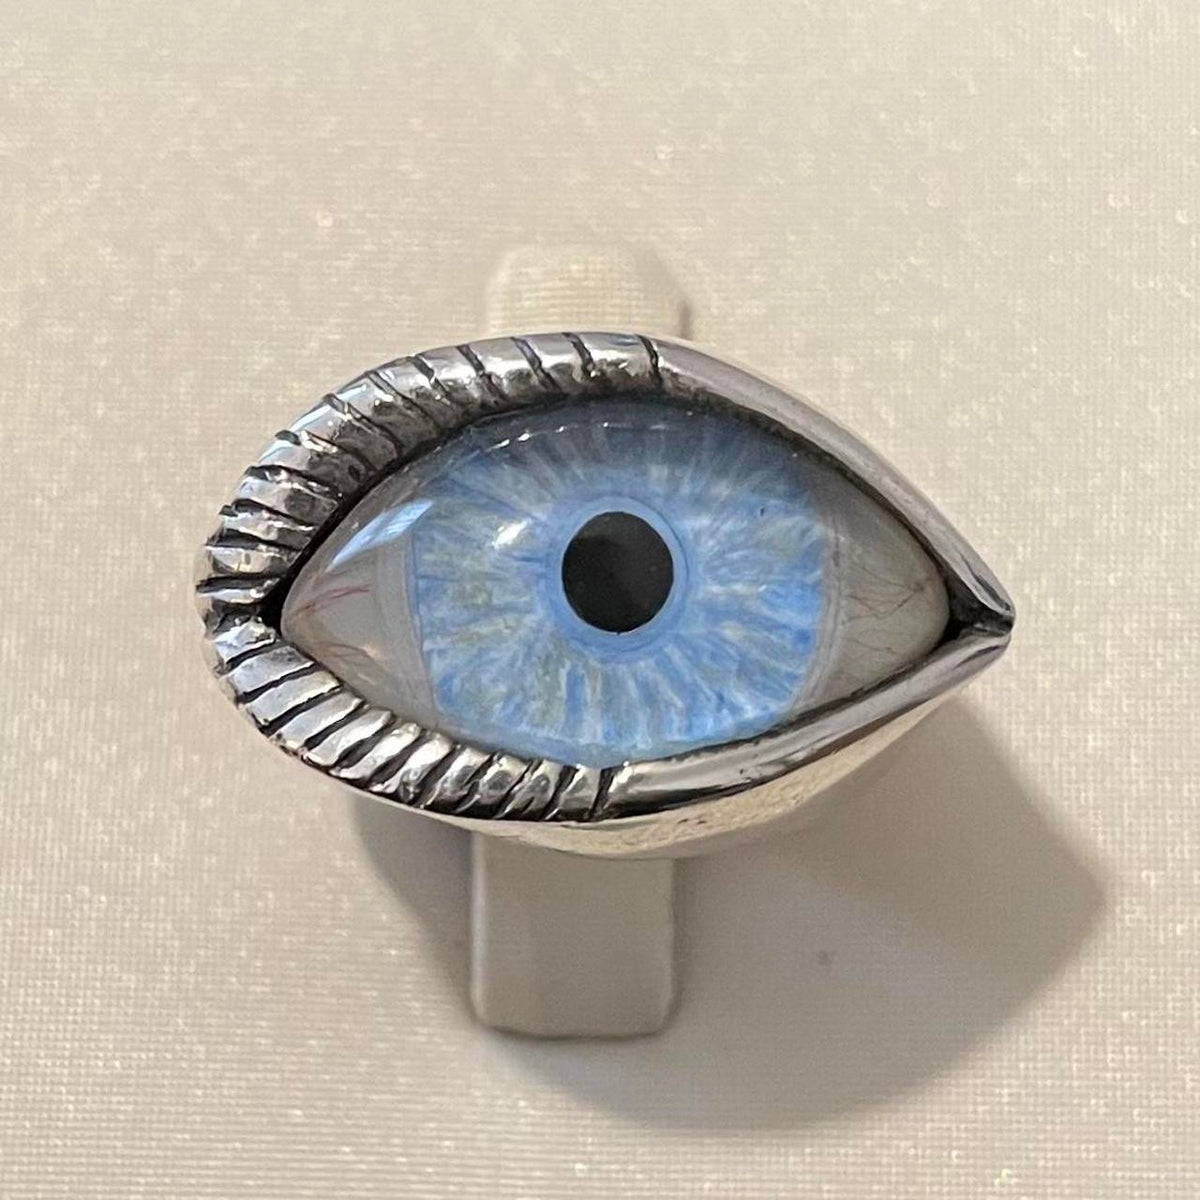 The Great Frog vintage sterling silver blue prosthetic eye ring